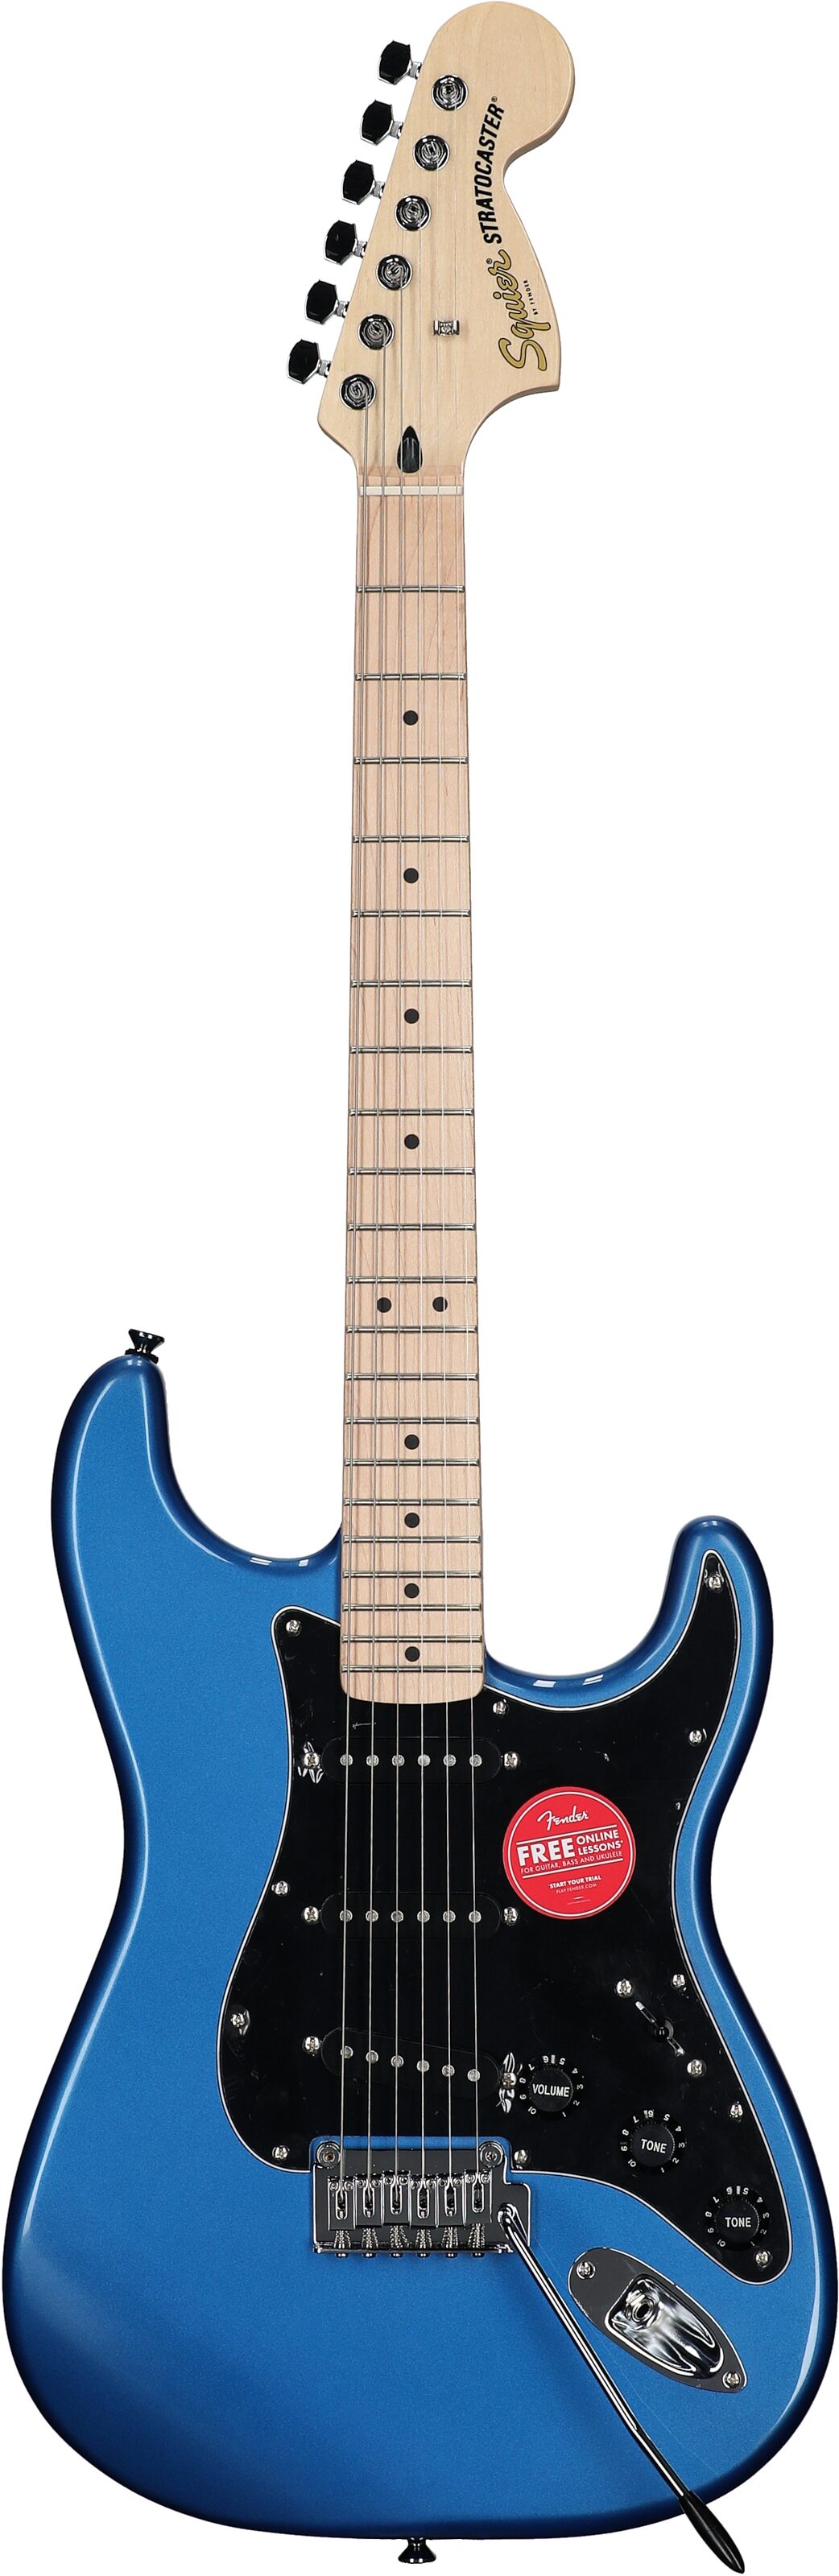 Squier Affinity Stratocaster Electric Guitar, with Maple Fingerboard